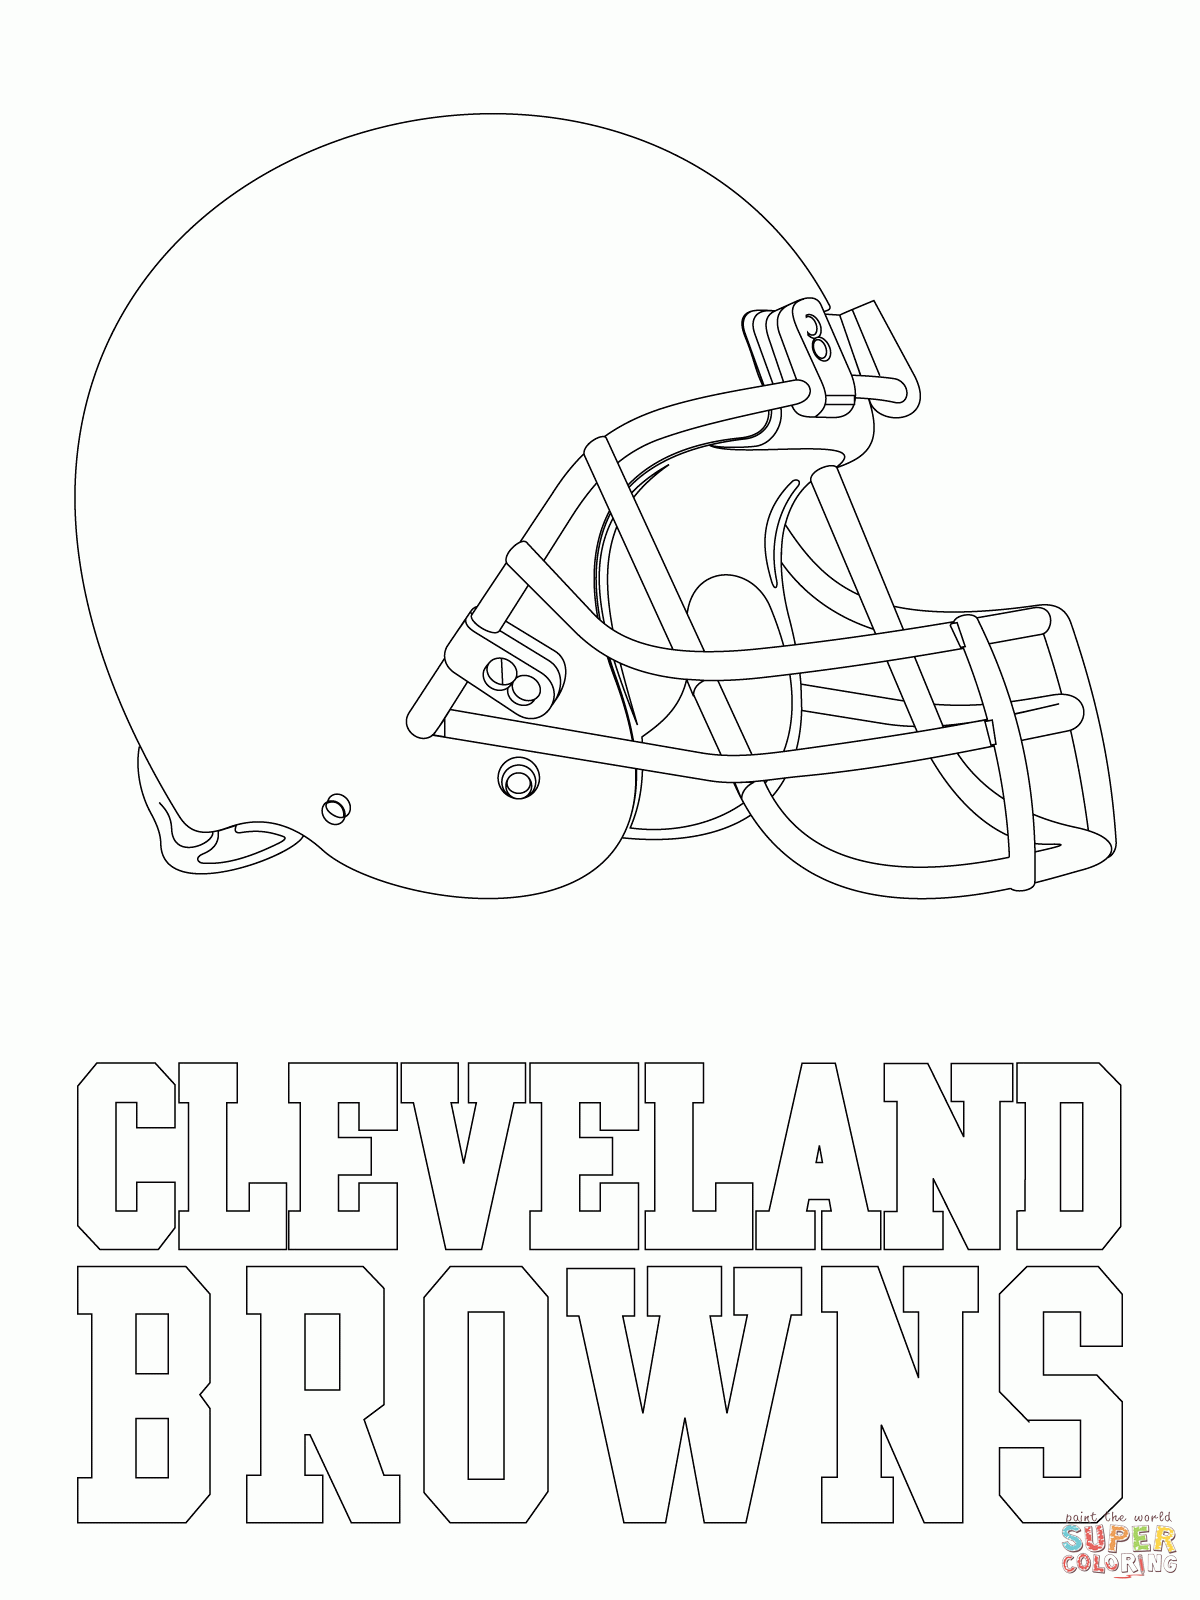 Cleveland Browns Logo coloring page | Free Printable Coloring Pages